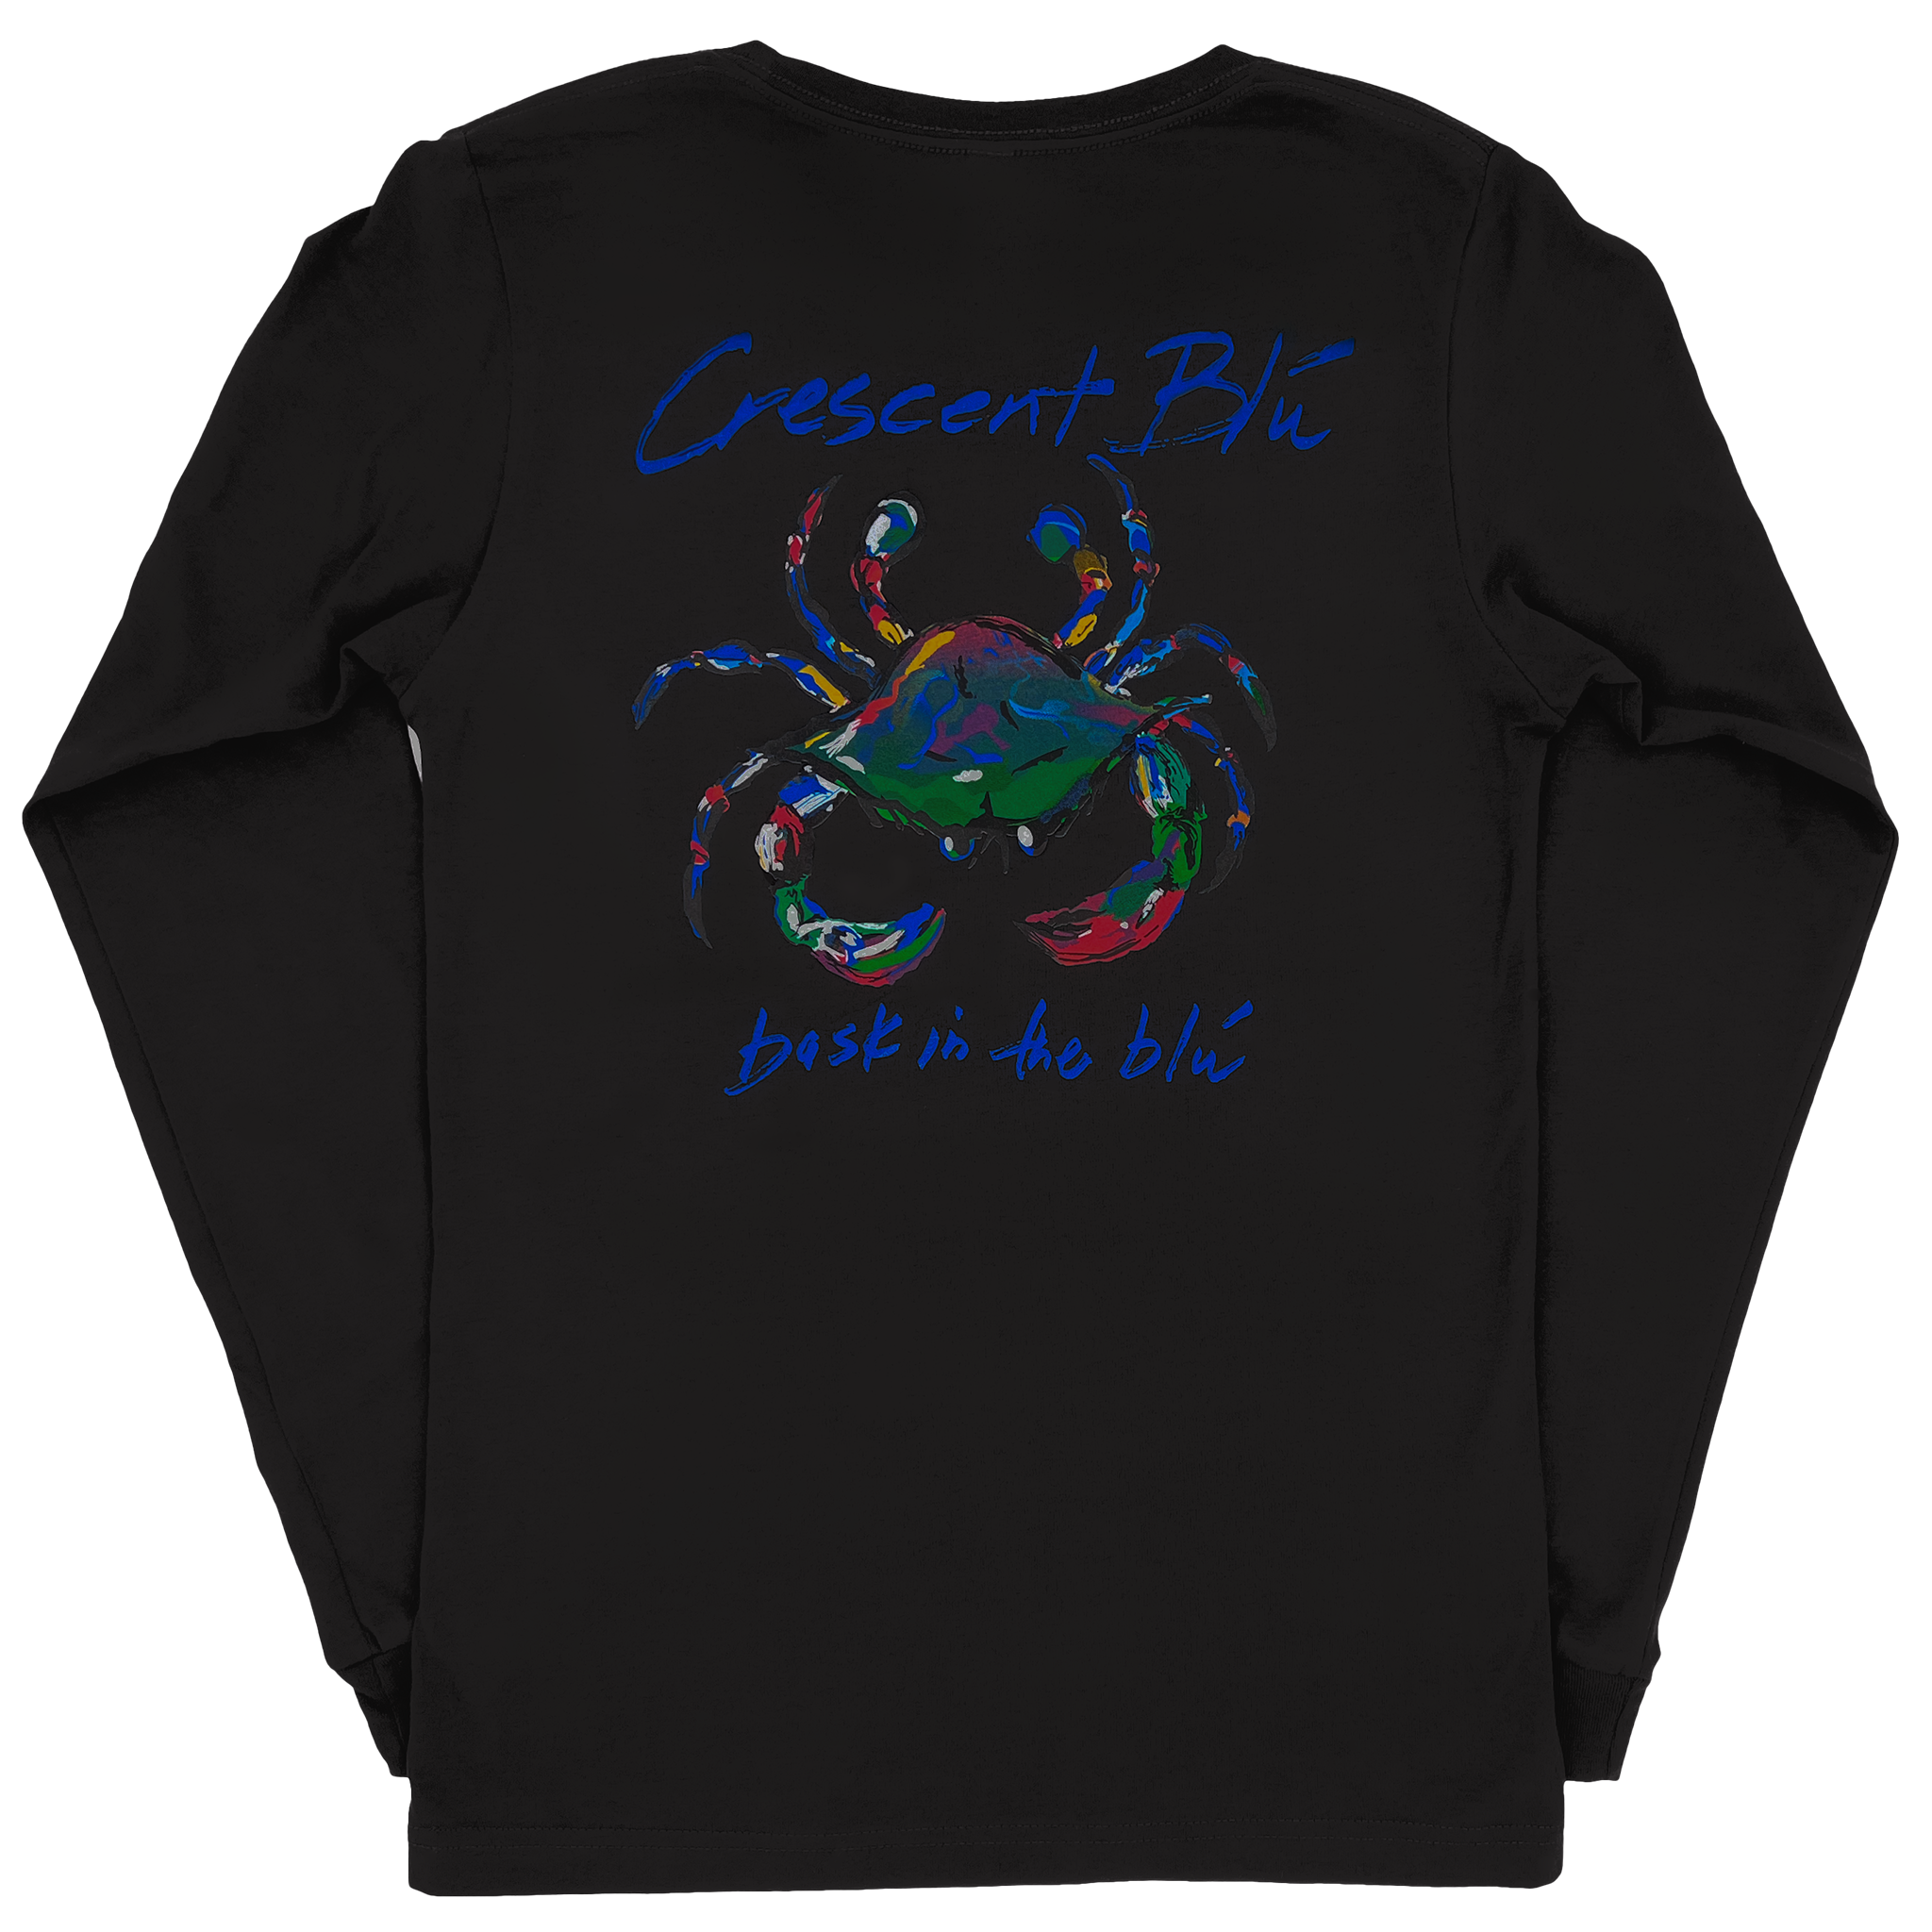 Back view of dark grey adult long sleeve tee with large multi-colored Crescent Blu Signature crab logo printed.